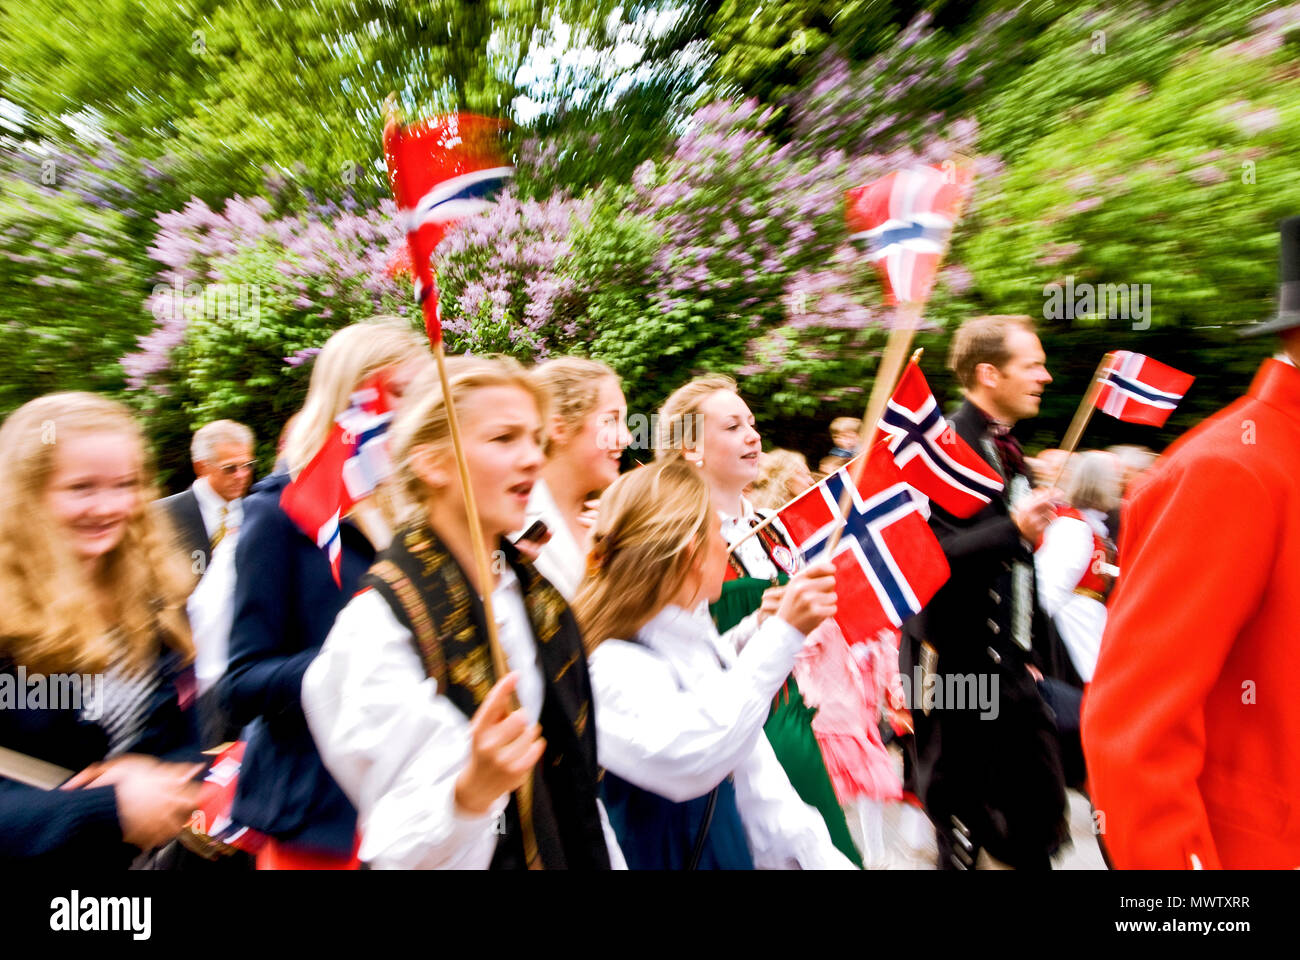 Norwegian Blonde High Resolution Stock Photography and Images - Alamy